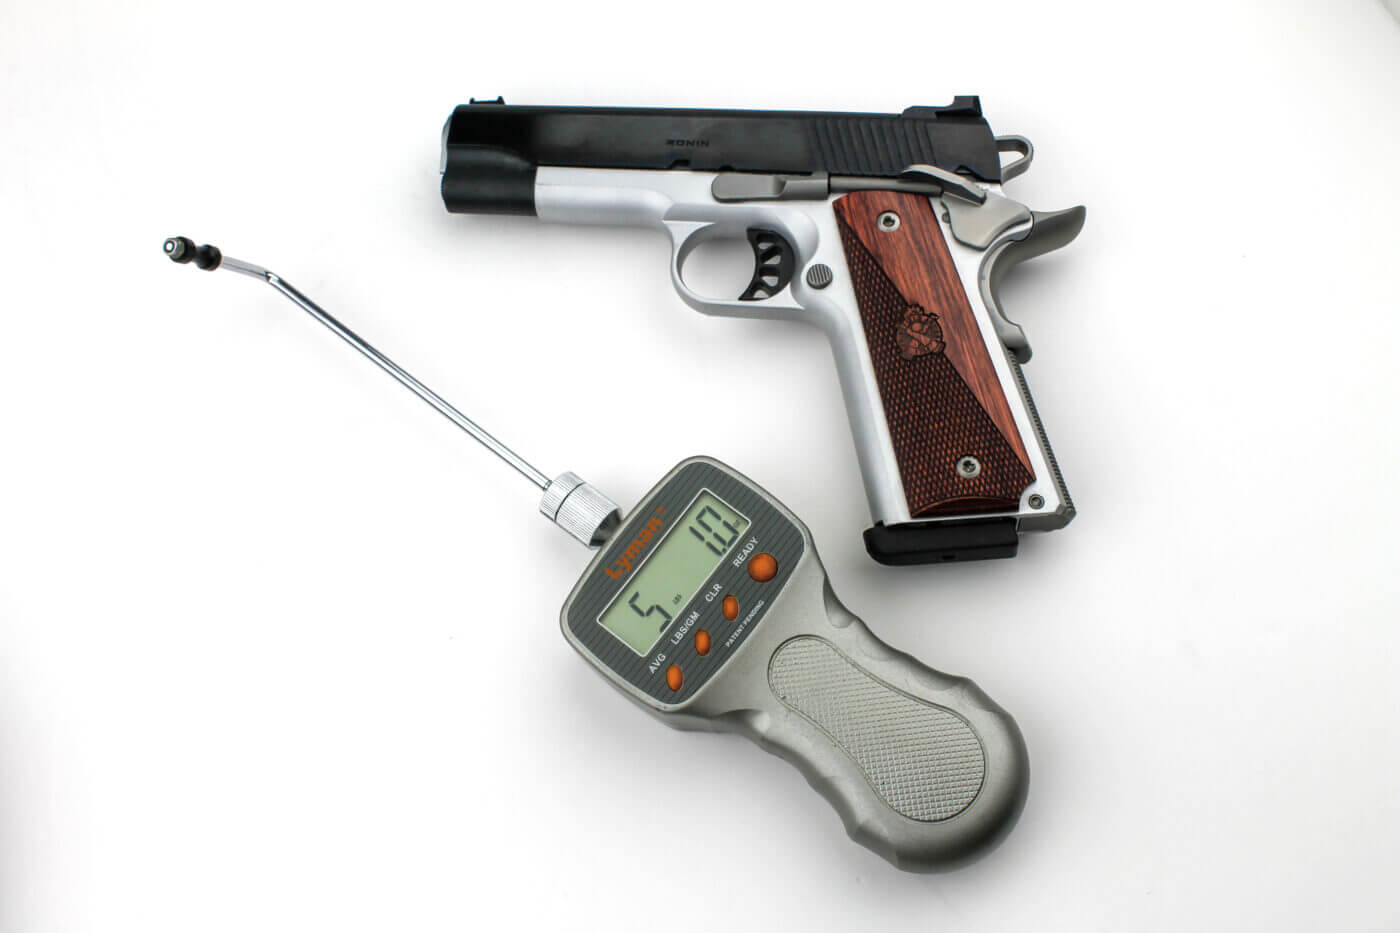 Pistol with trigger pull weight measuring devices